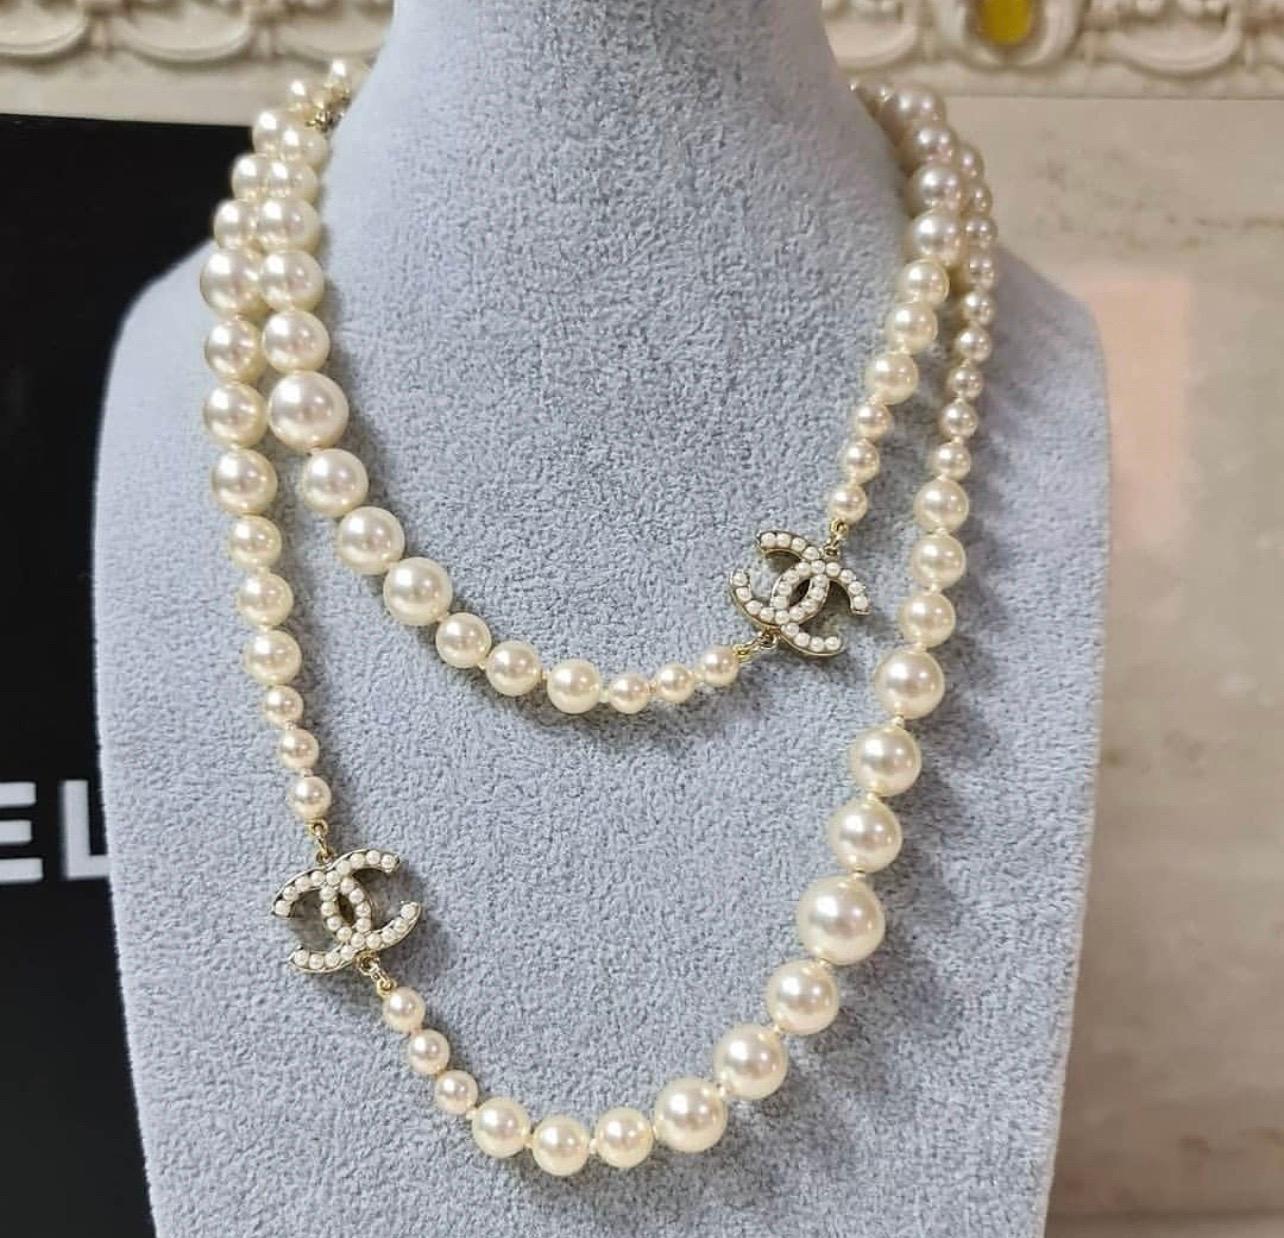 Chanel   Pearl CC Necklace

Chanel pearl necklace with two CC with small pearls on both sides.

This elegant Chanel Necklace can be worn long or double turn.

Year of Production: 2007
Color: Goldtone
Materials: Metal, faux pearl
Closure: Lobster